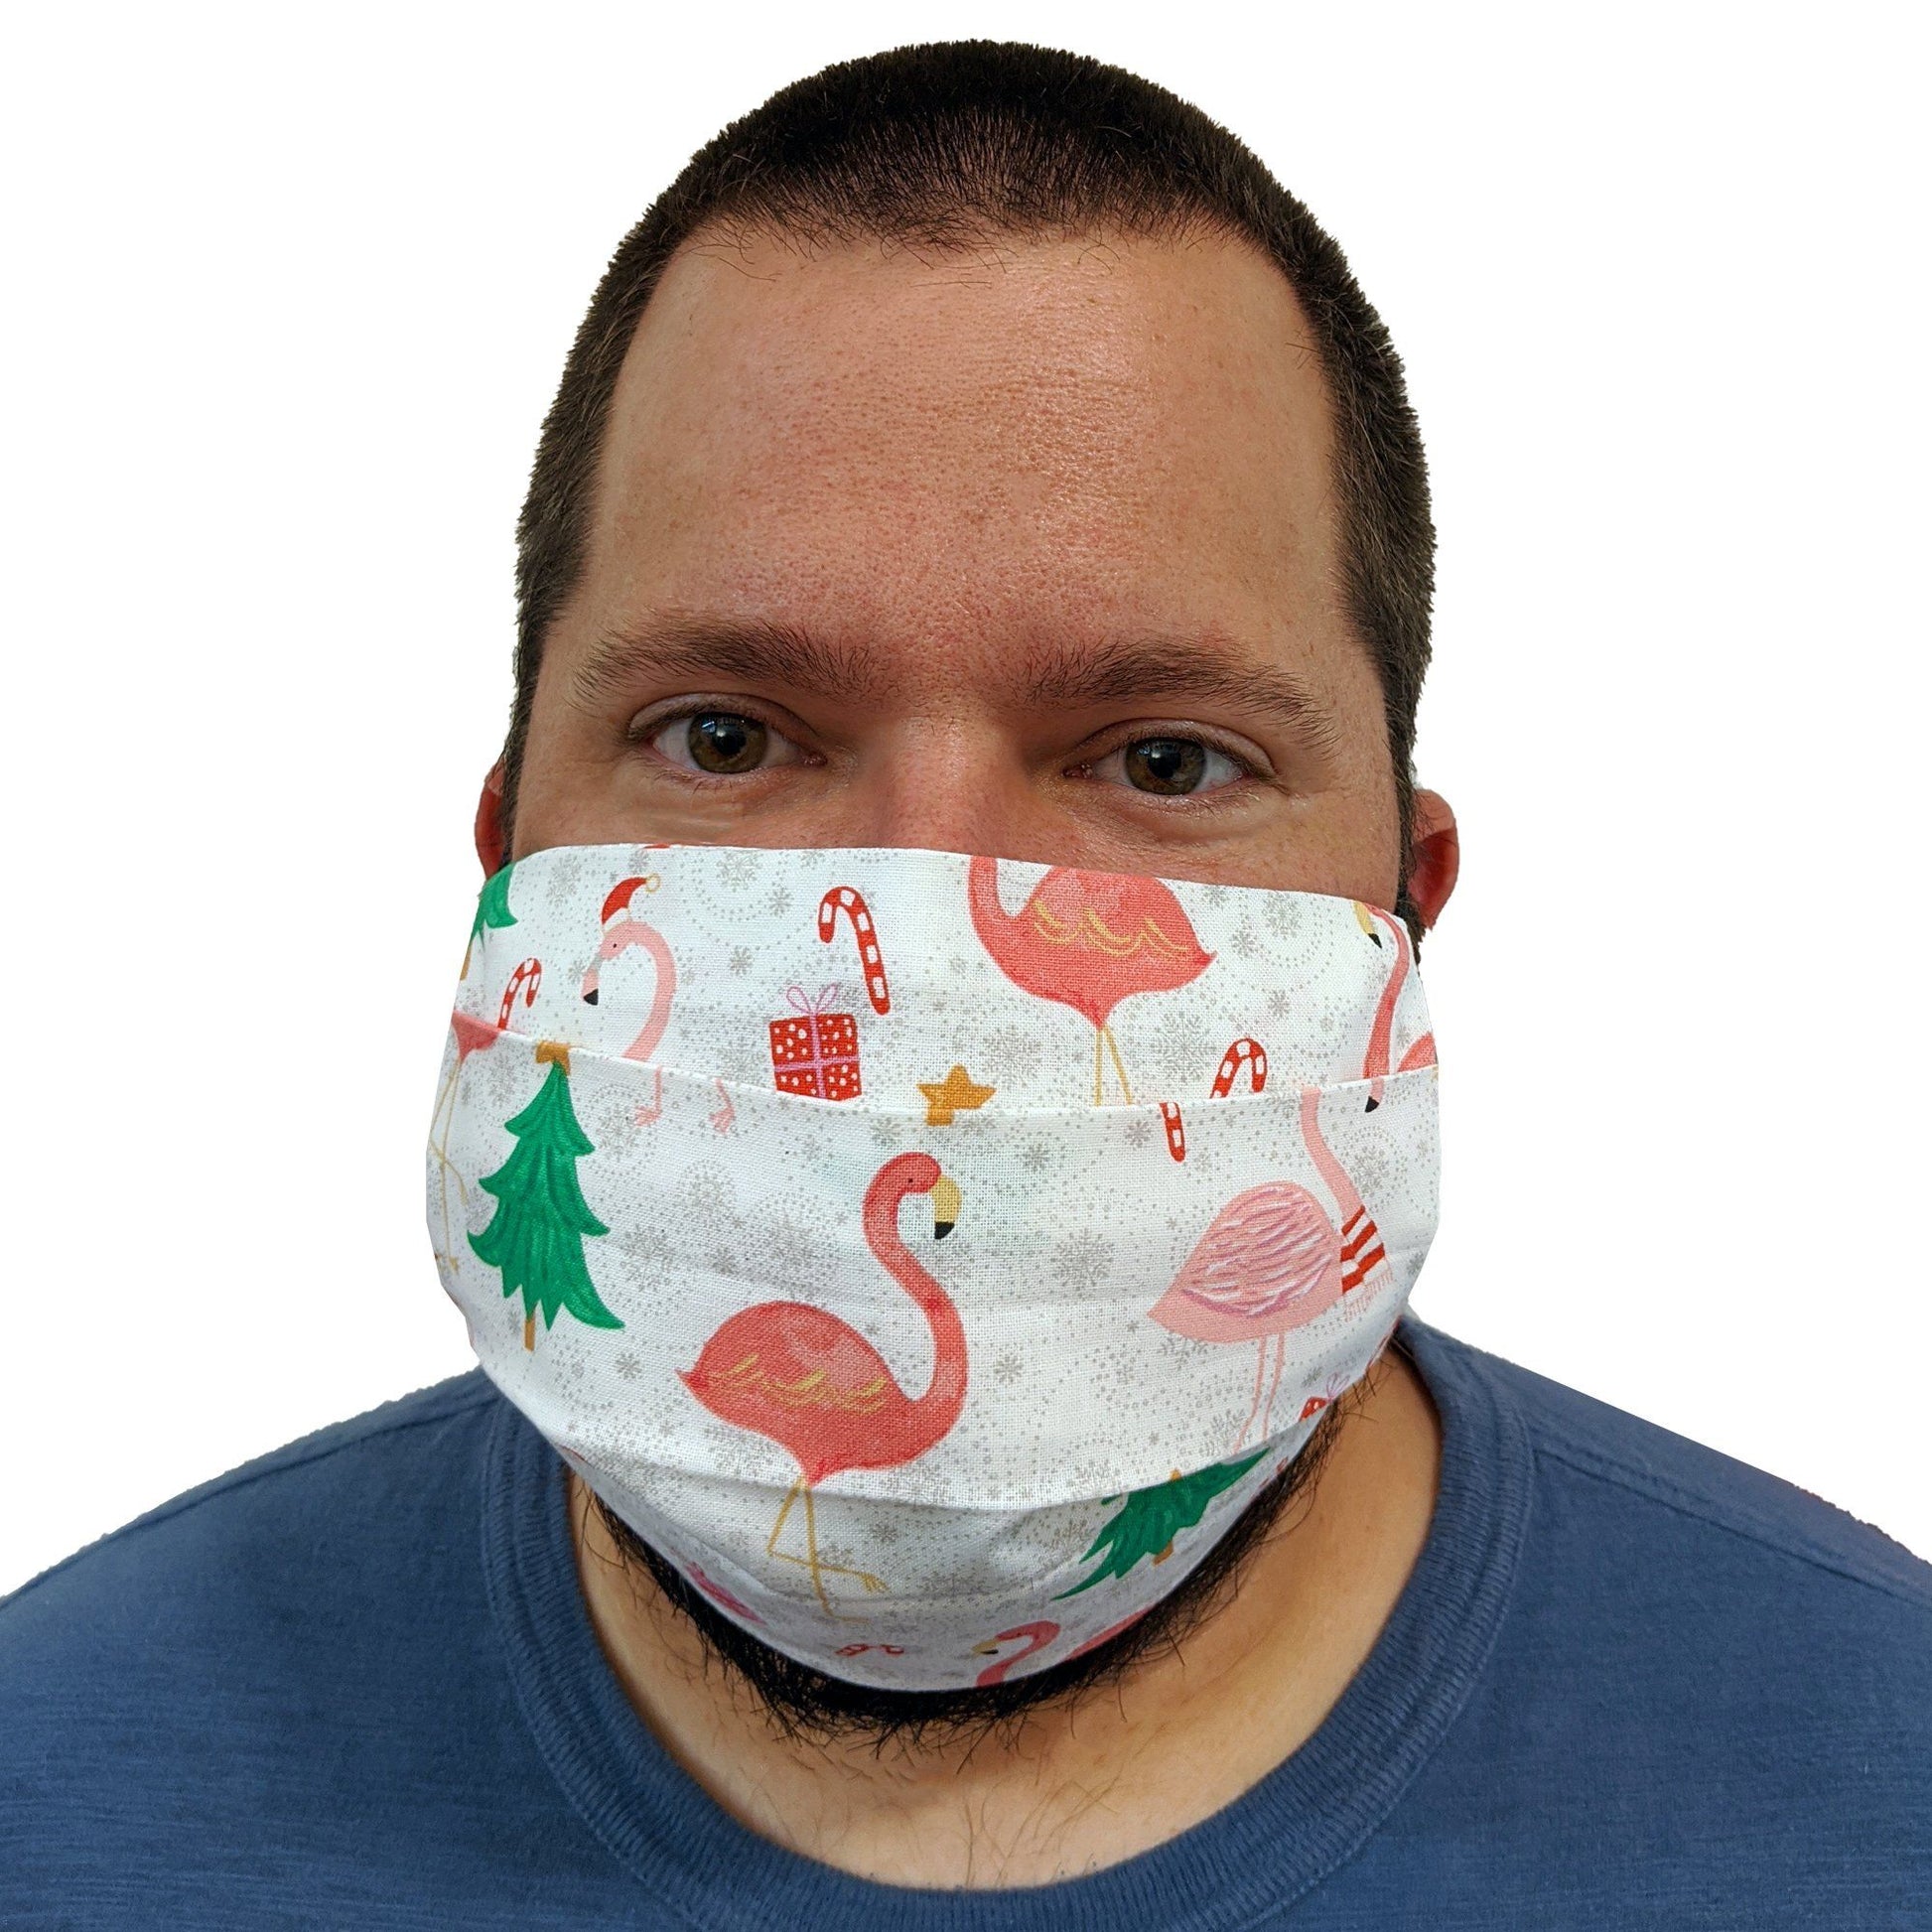 Christmas Face Masks- Adjustable Face Masks with Filer Pocket - Reusable & Washable with Cotton Blend Fabric Face Mask Square Up Fashions 